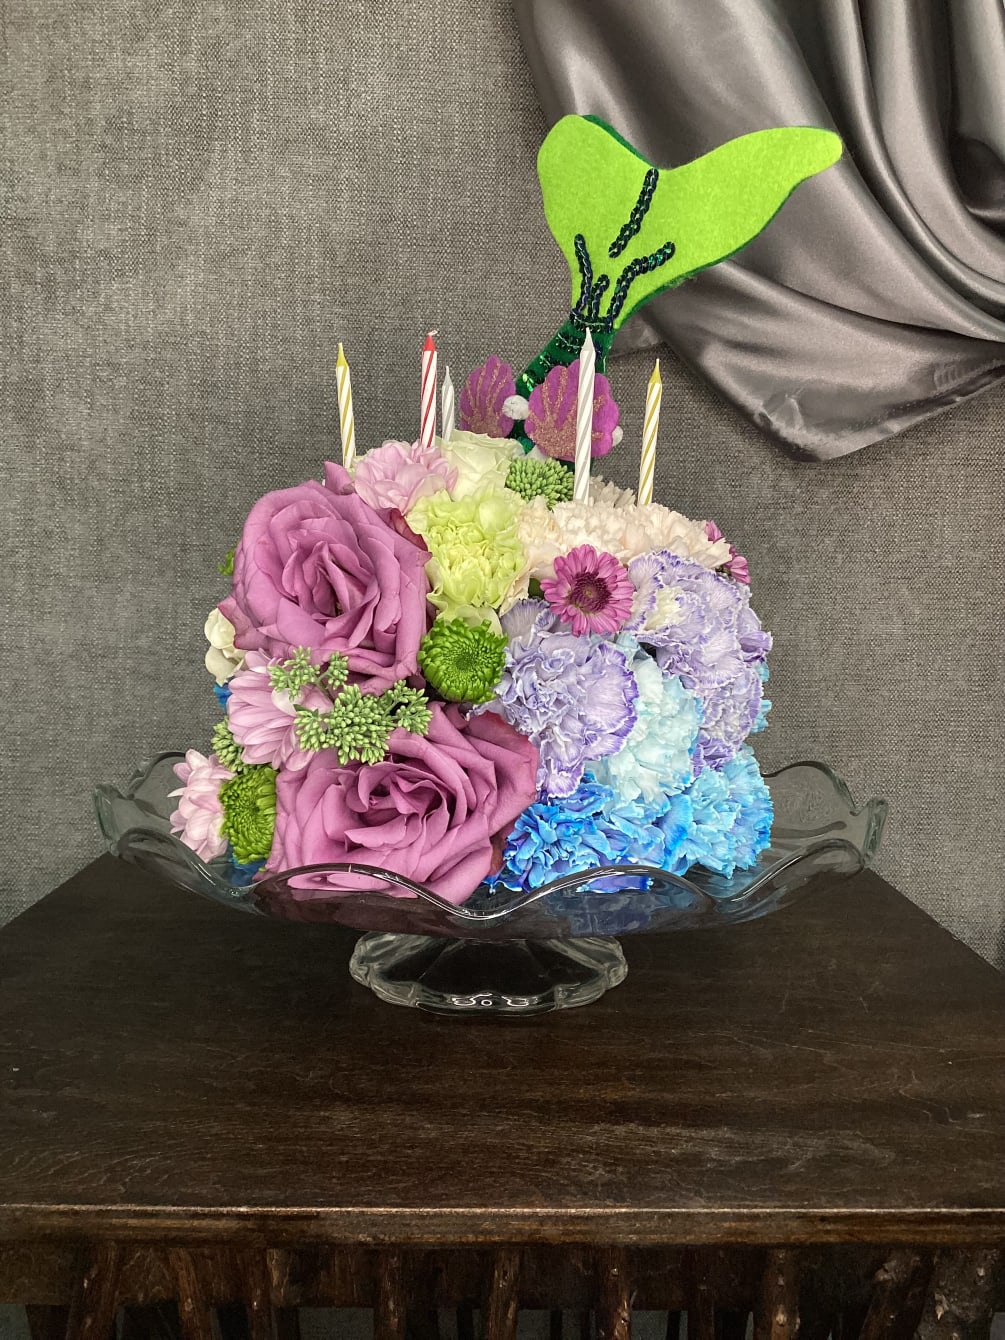 A Collection of Stunning Florals in The Shape of a Themed Cake